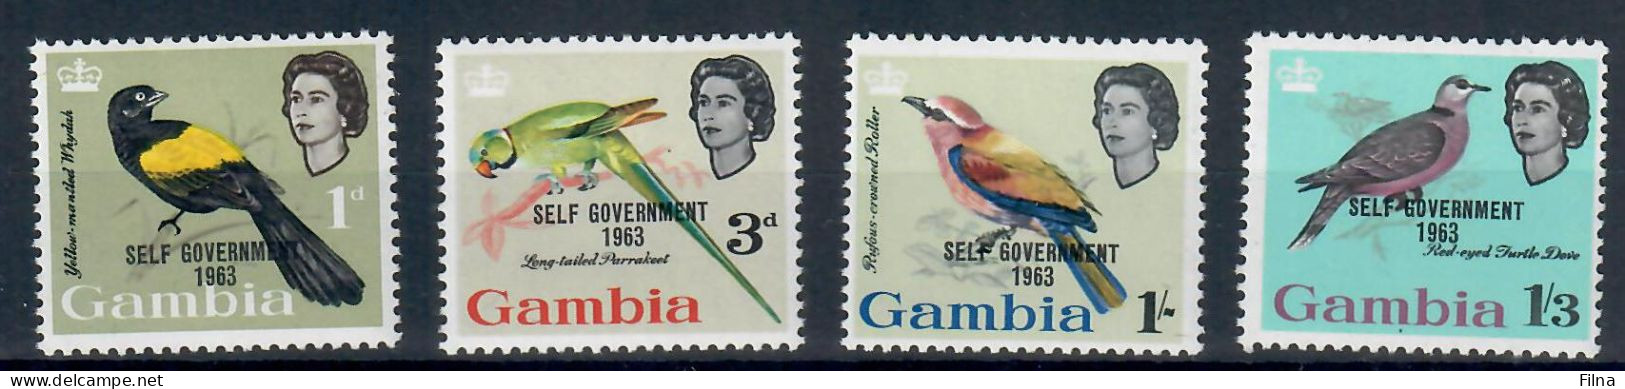 GAMBIA 1963 FAUNA  UCCELLI BIRDS OISEAUX SERIE COMPLETA OVERPRINTED SELF GOVERNMENT 1963  Mi.Nr.183/6  MNH/** - Gambie (1965-...)